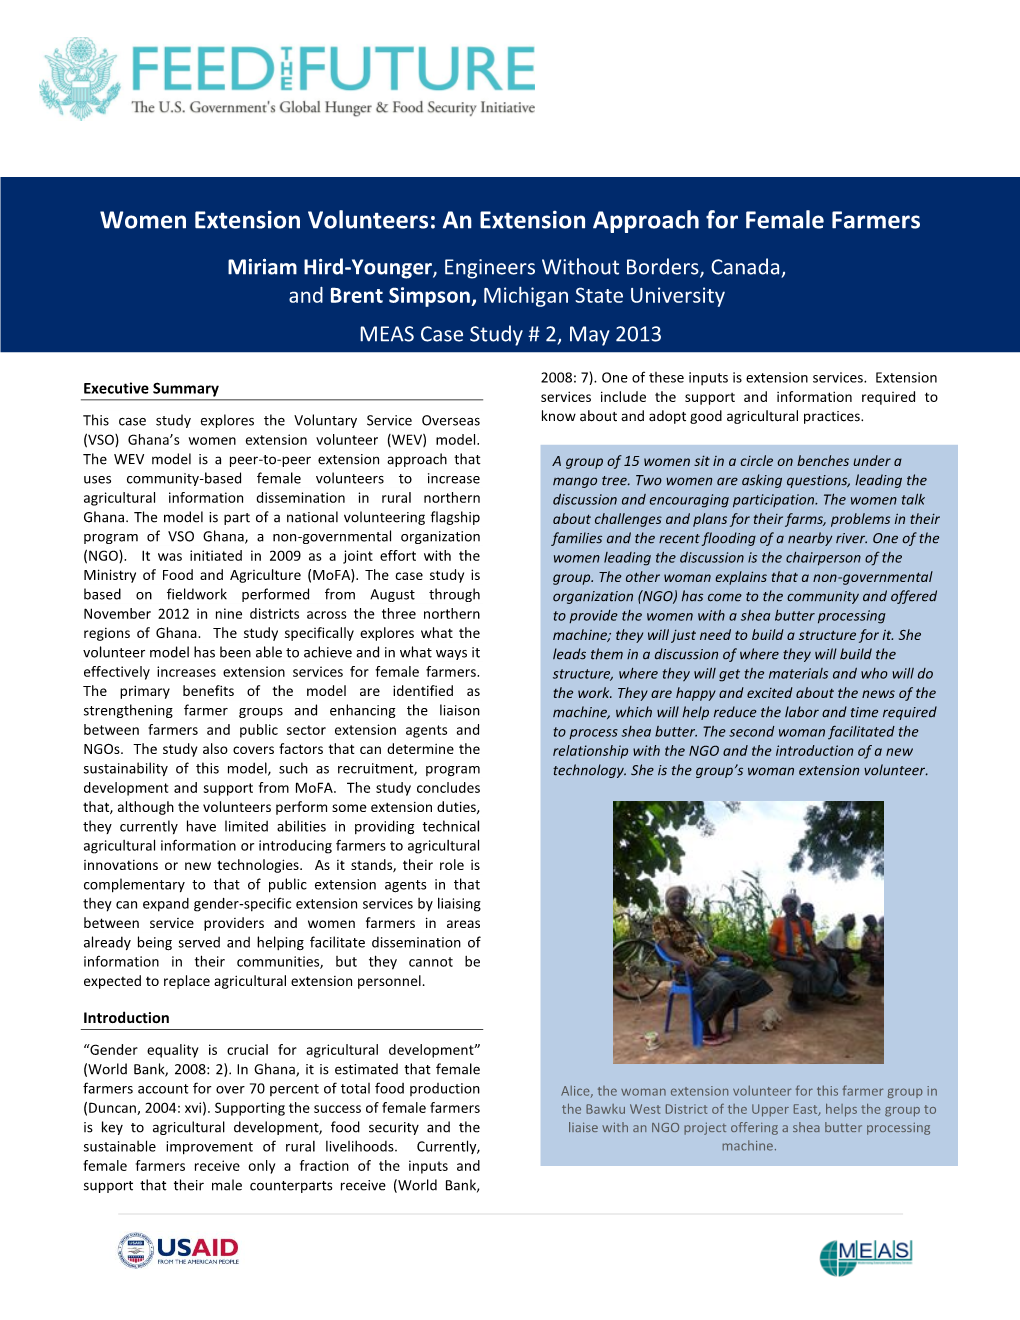 An Extension Approach for Female Farmers